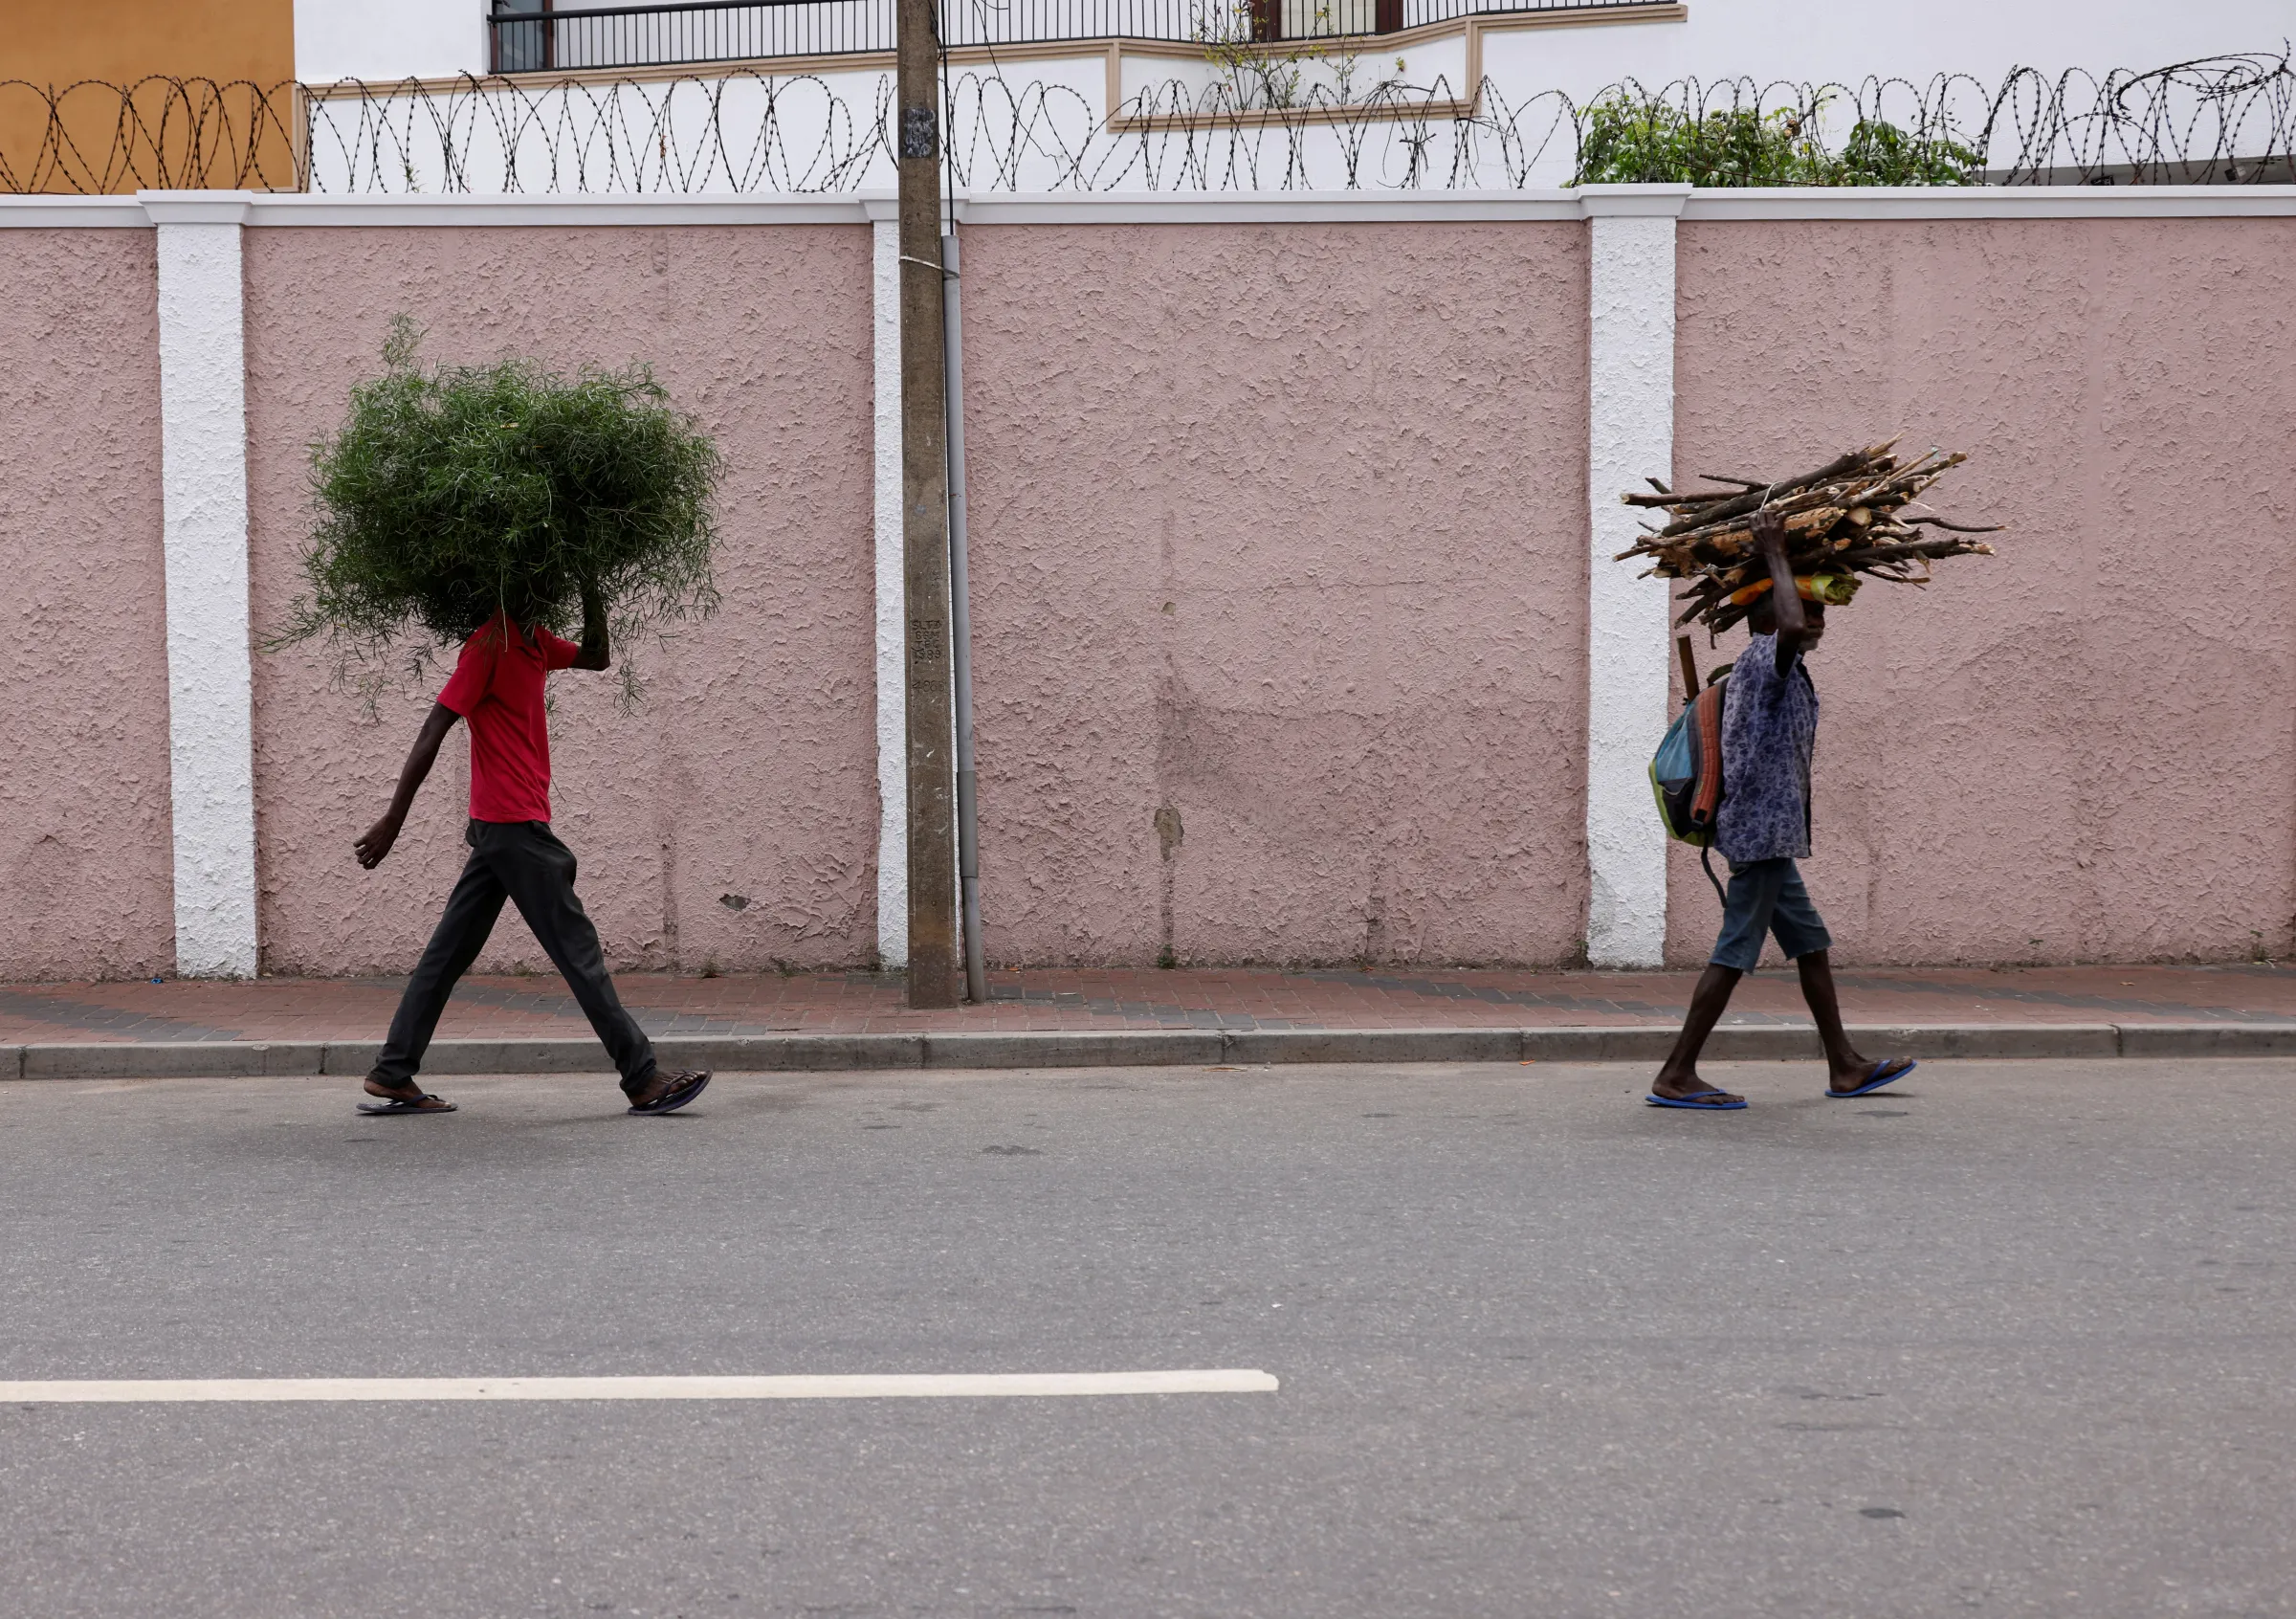 Men carry firewoods to sell them in a market in the fuel shortage